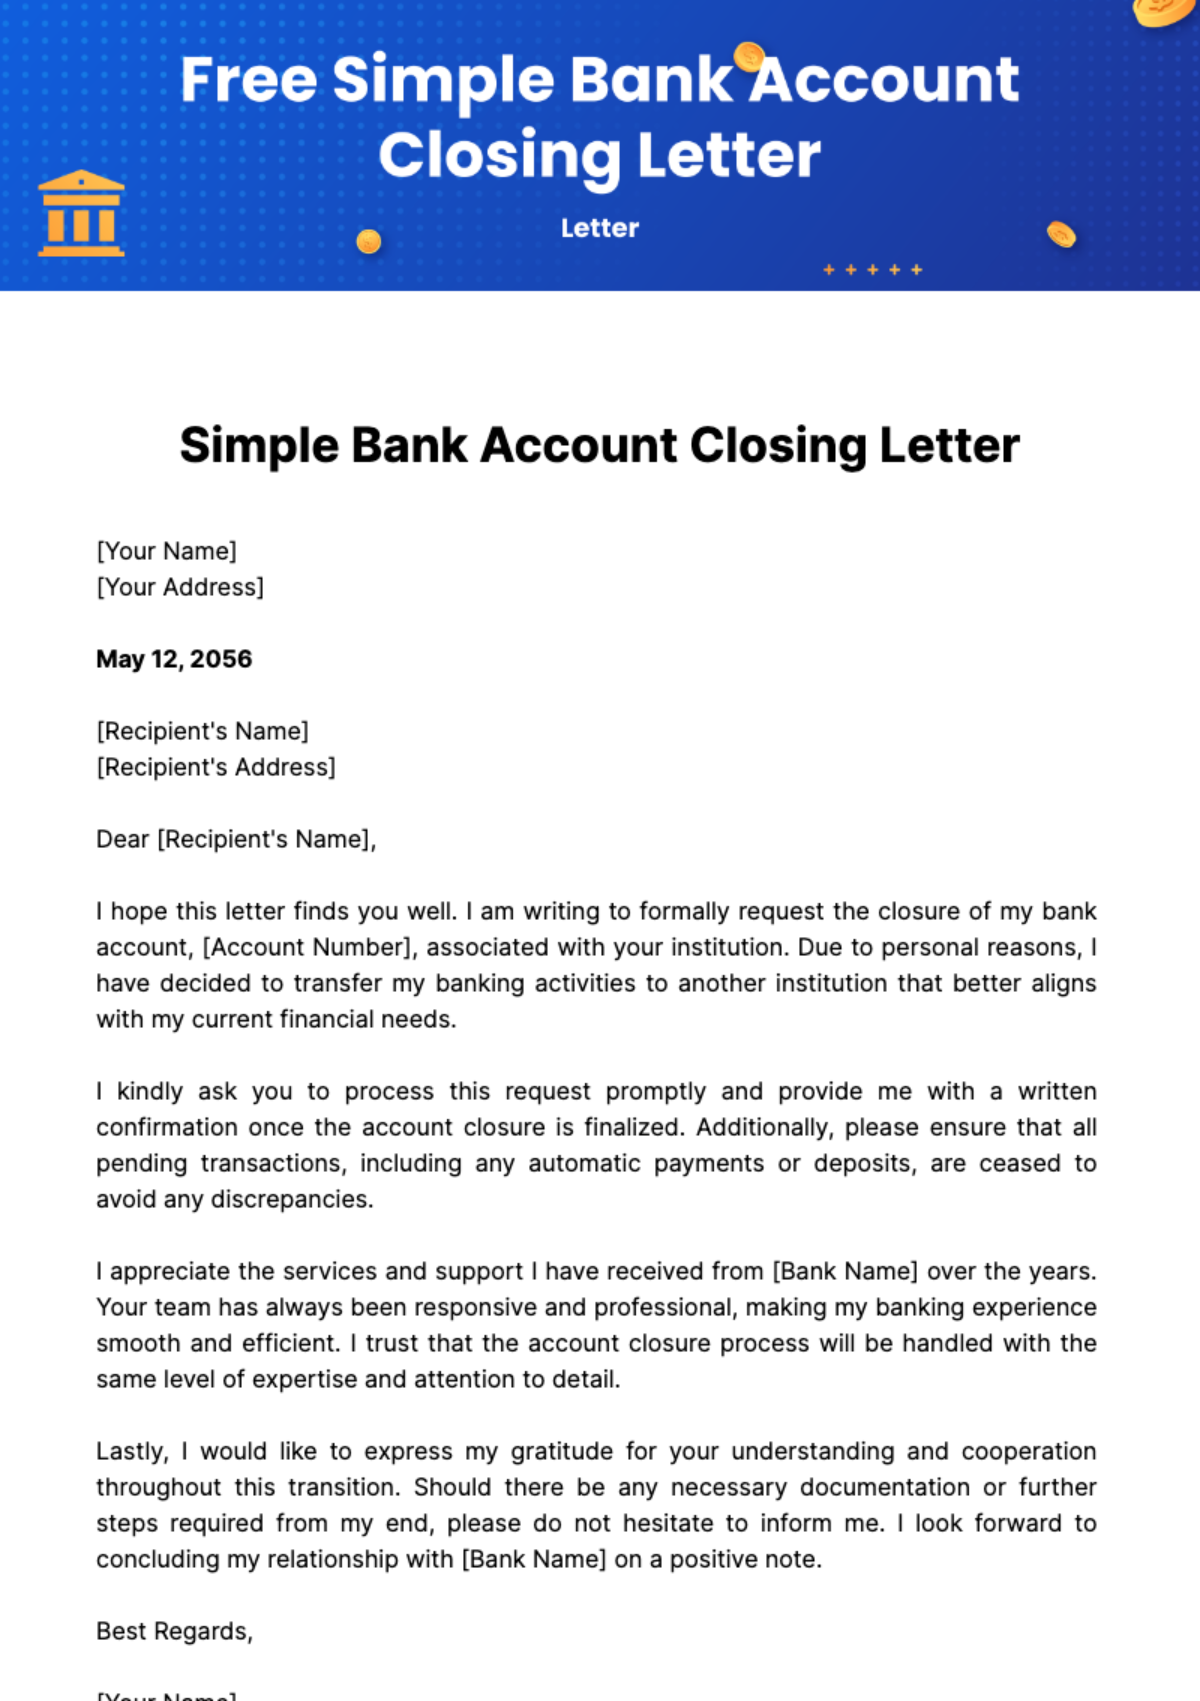 Free Simple Bank Account Closing Letter Template